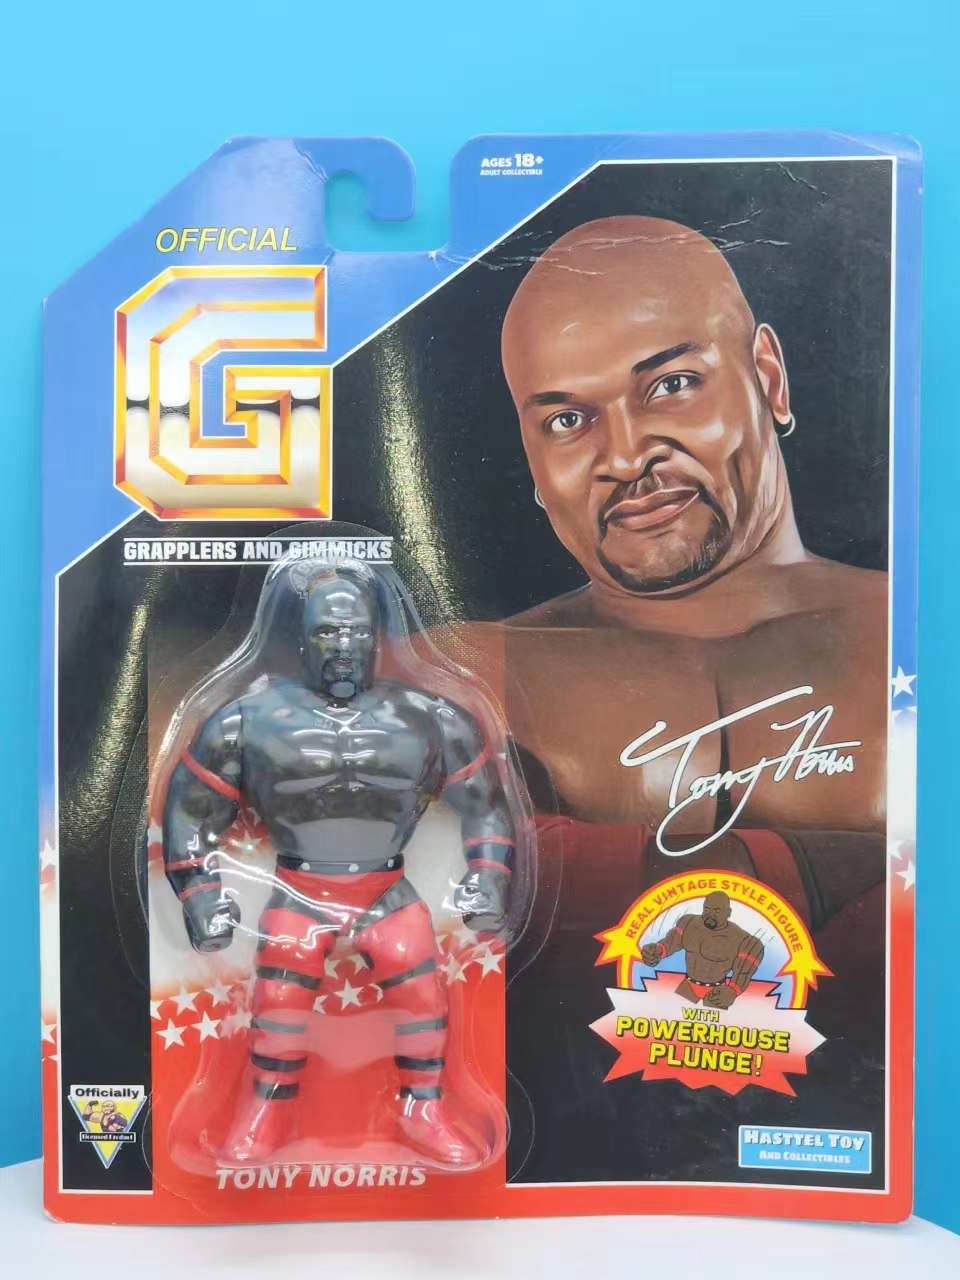 Hasttel Toy Grapple and Gimmicks Ahmed Johnson Tony Norris